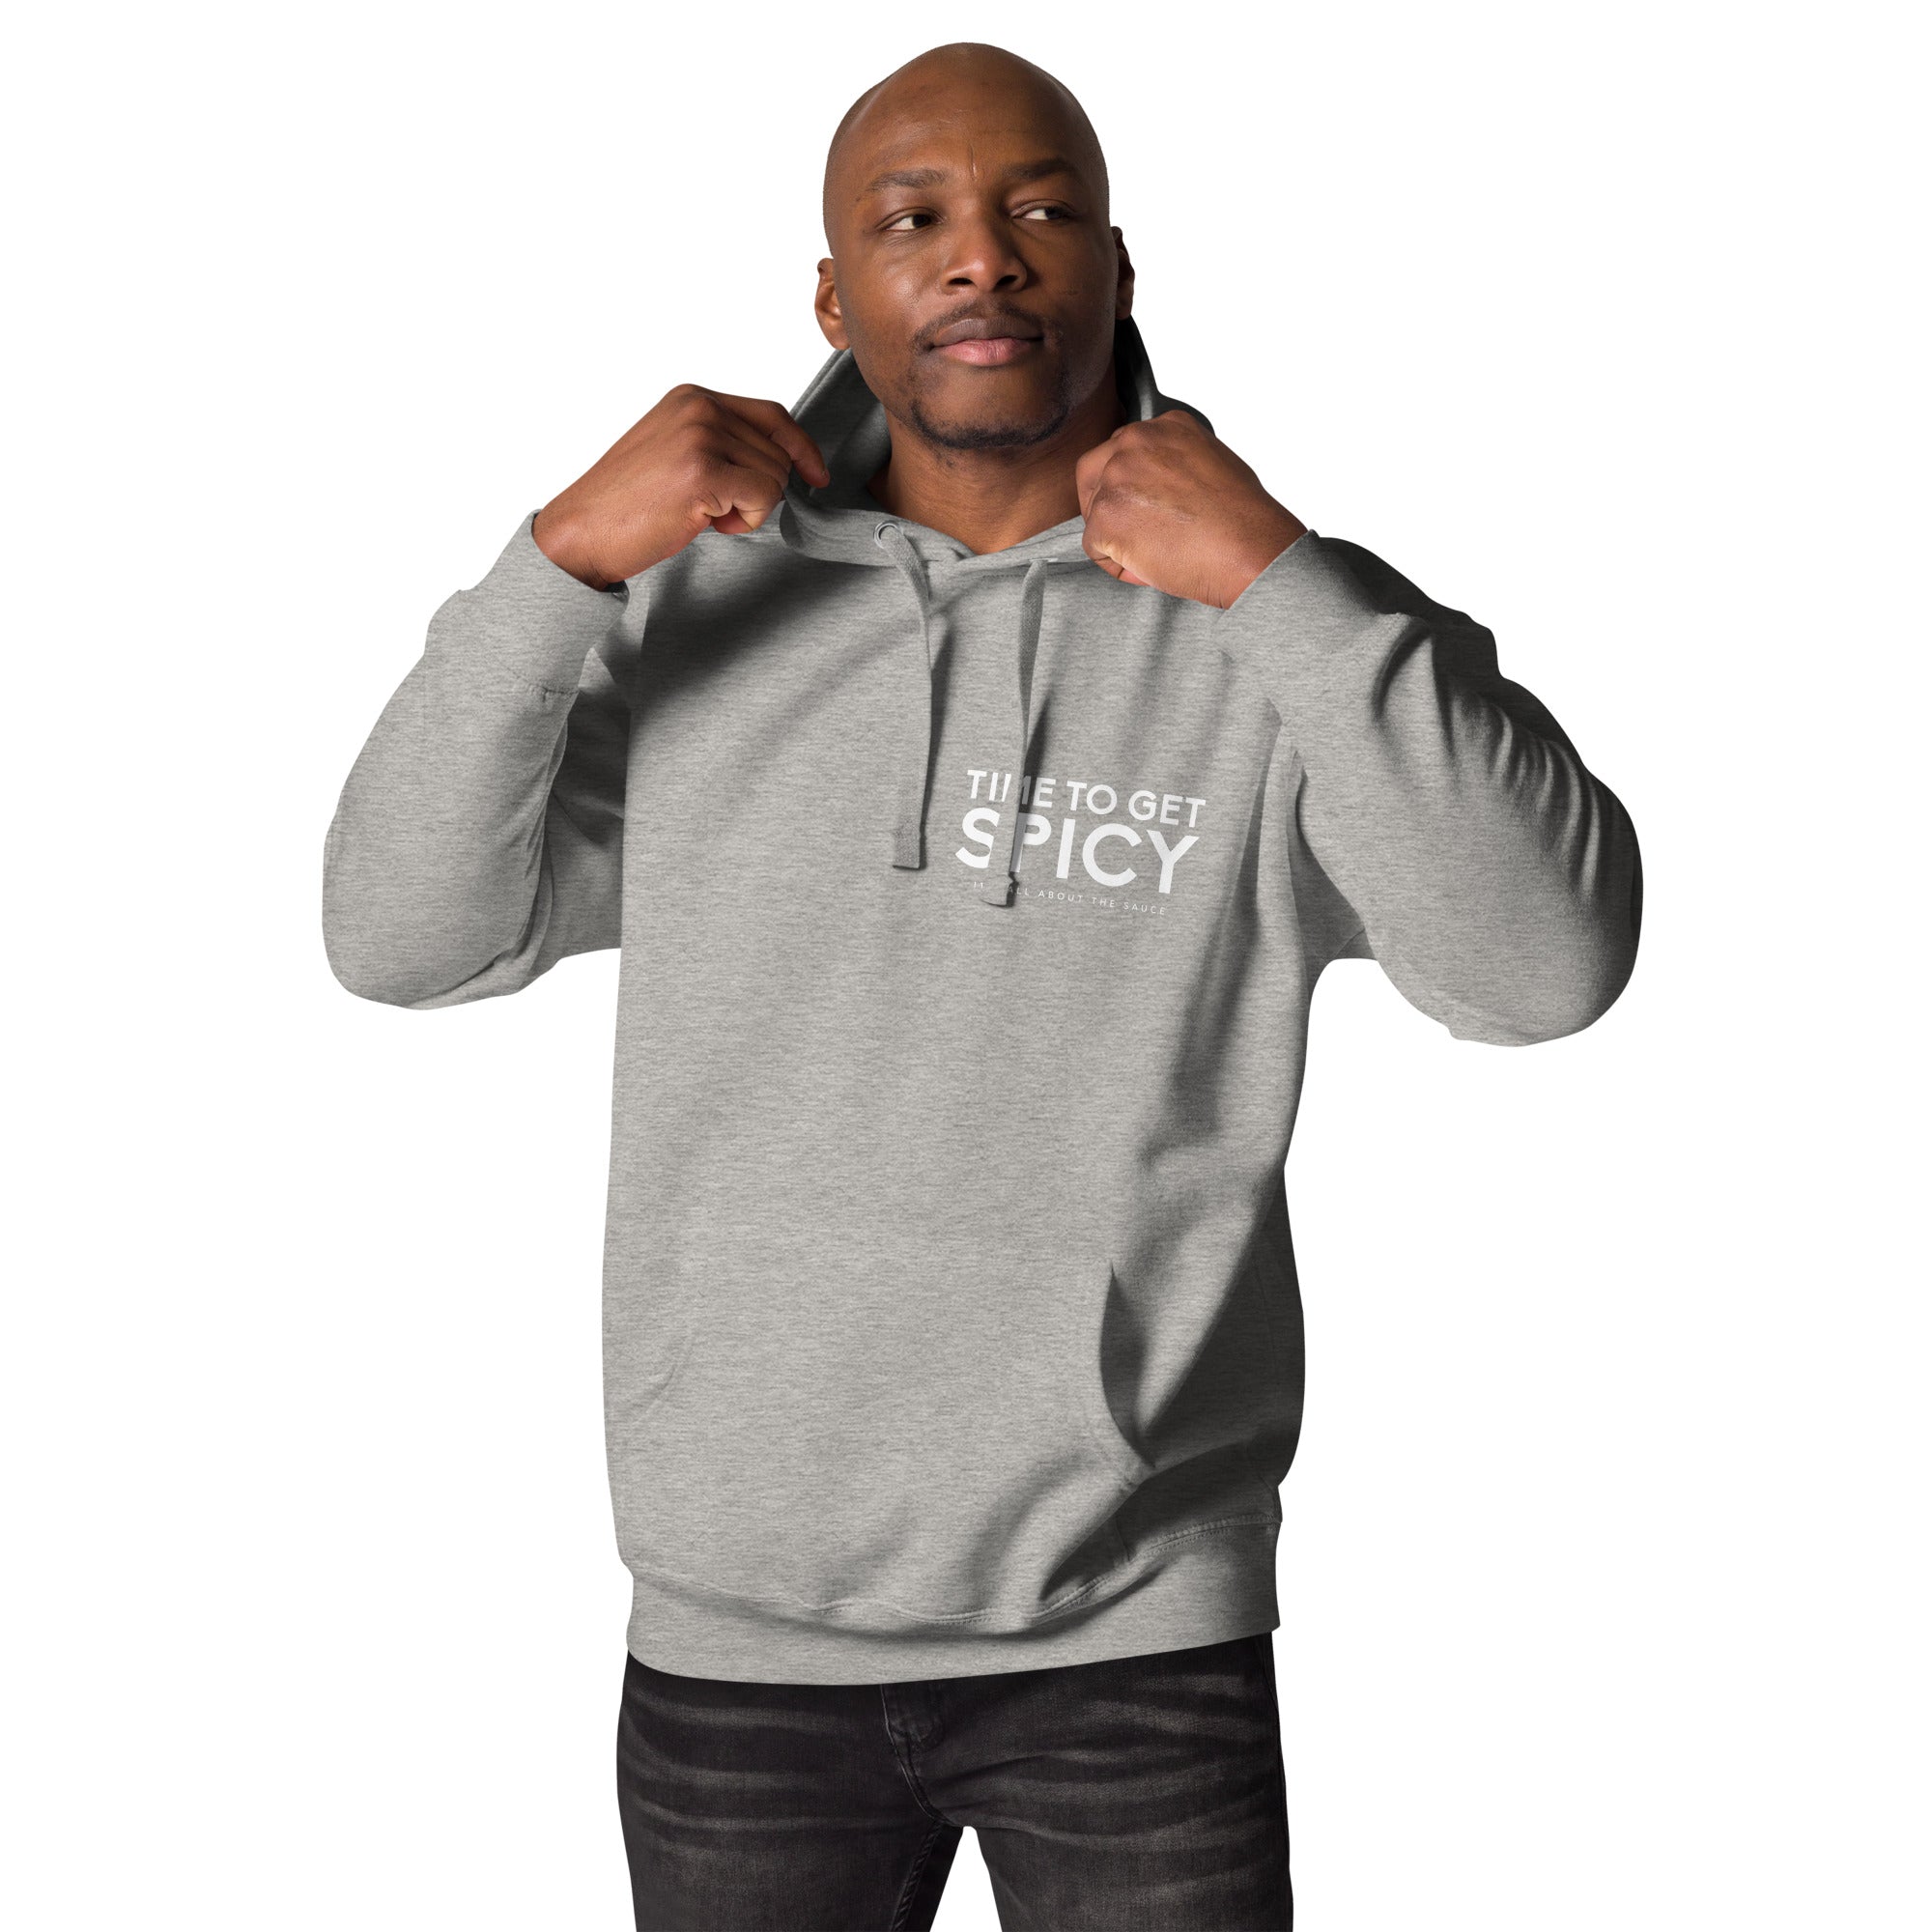 Time To Get Spicy - Unisex Hoodie